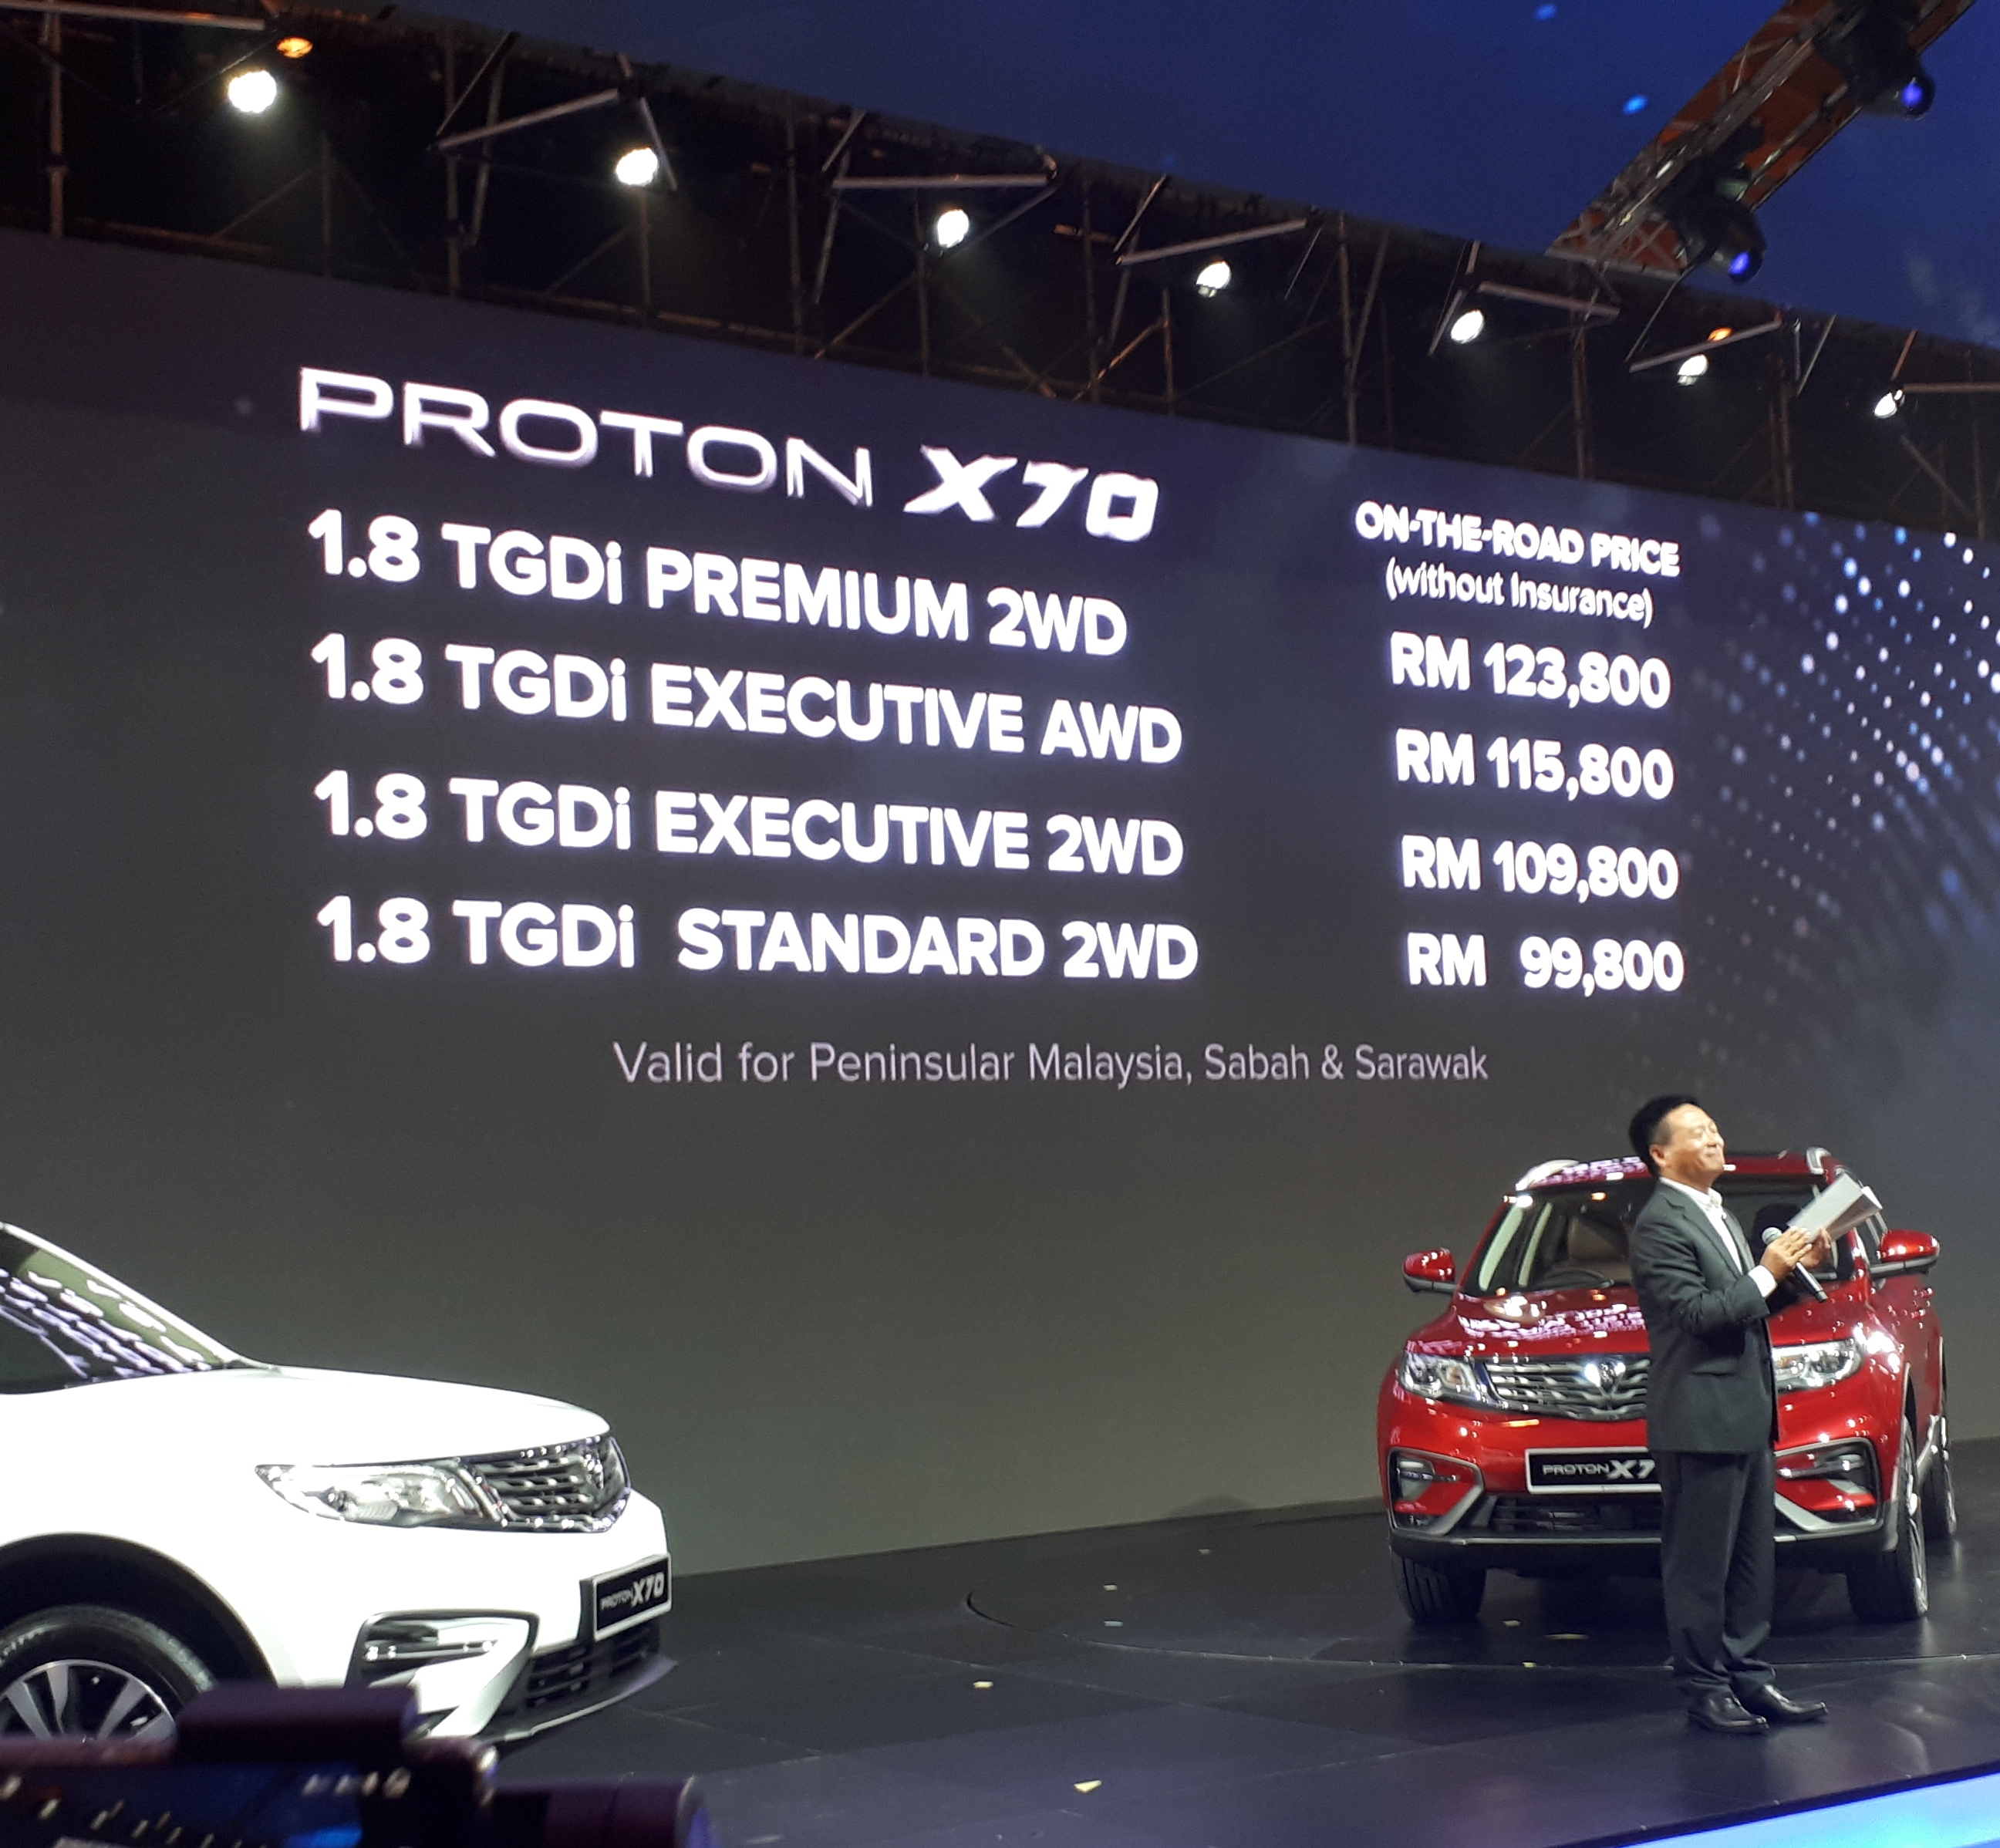 Proton In 2018 Part 21 Proton X70 Suv Officially Launched Prices Announced Videos News And Reviews On Malaysian Cars Motorcycles And Automotive Lifestyle